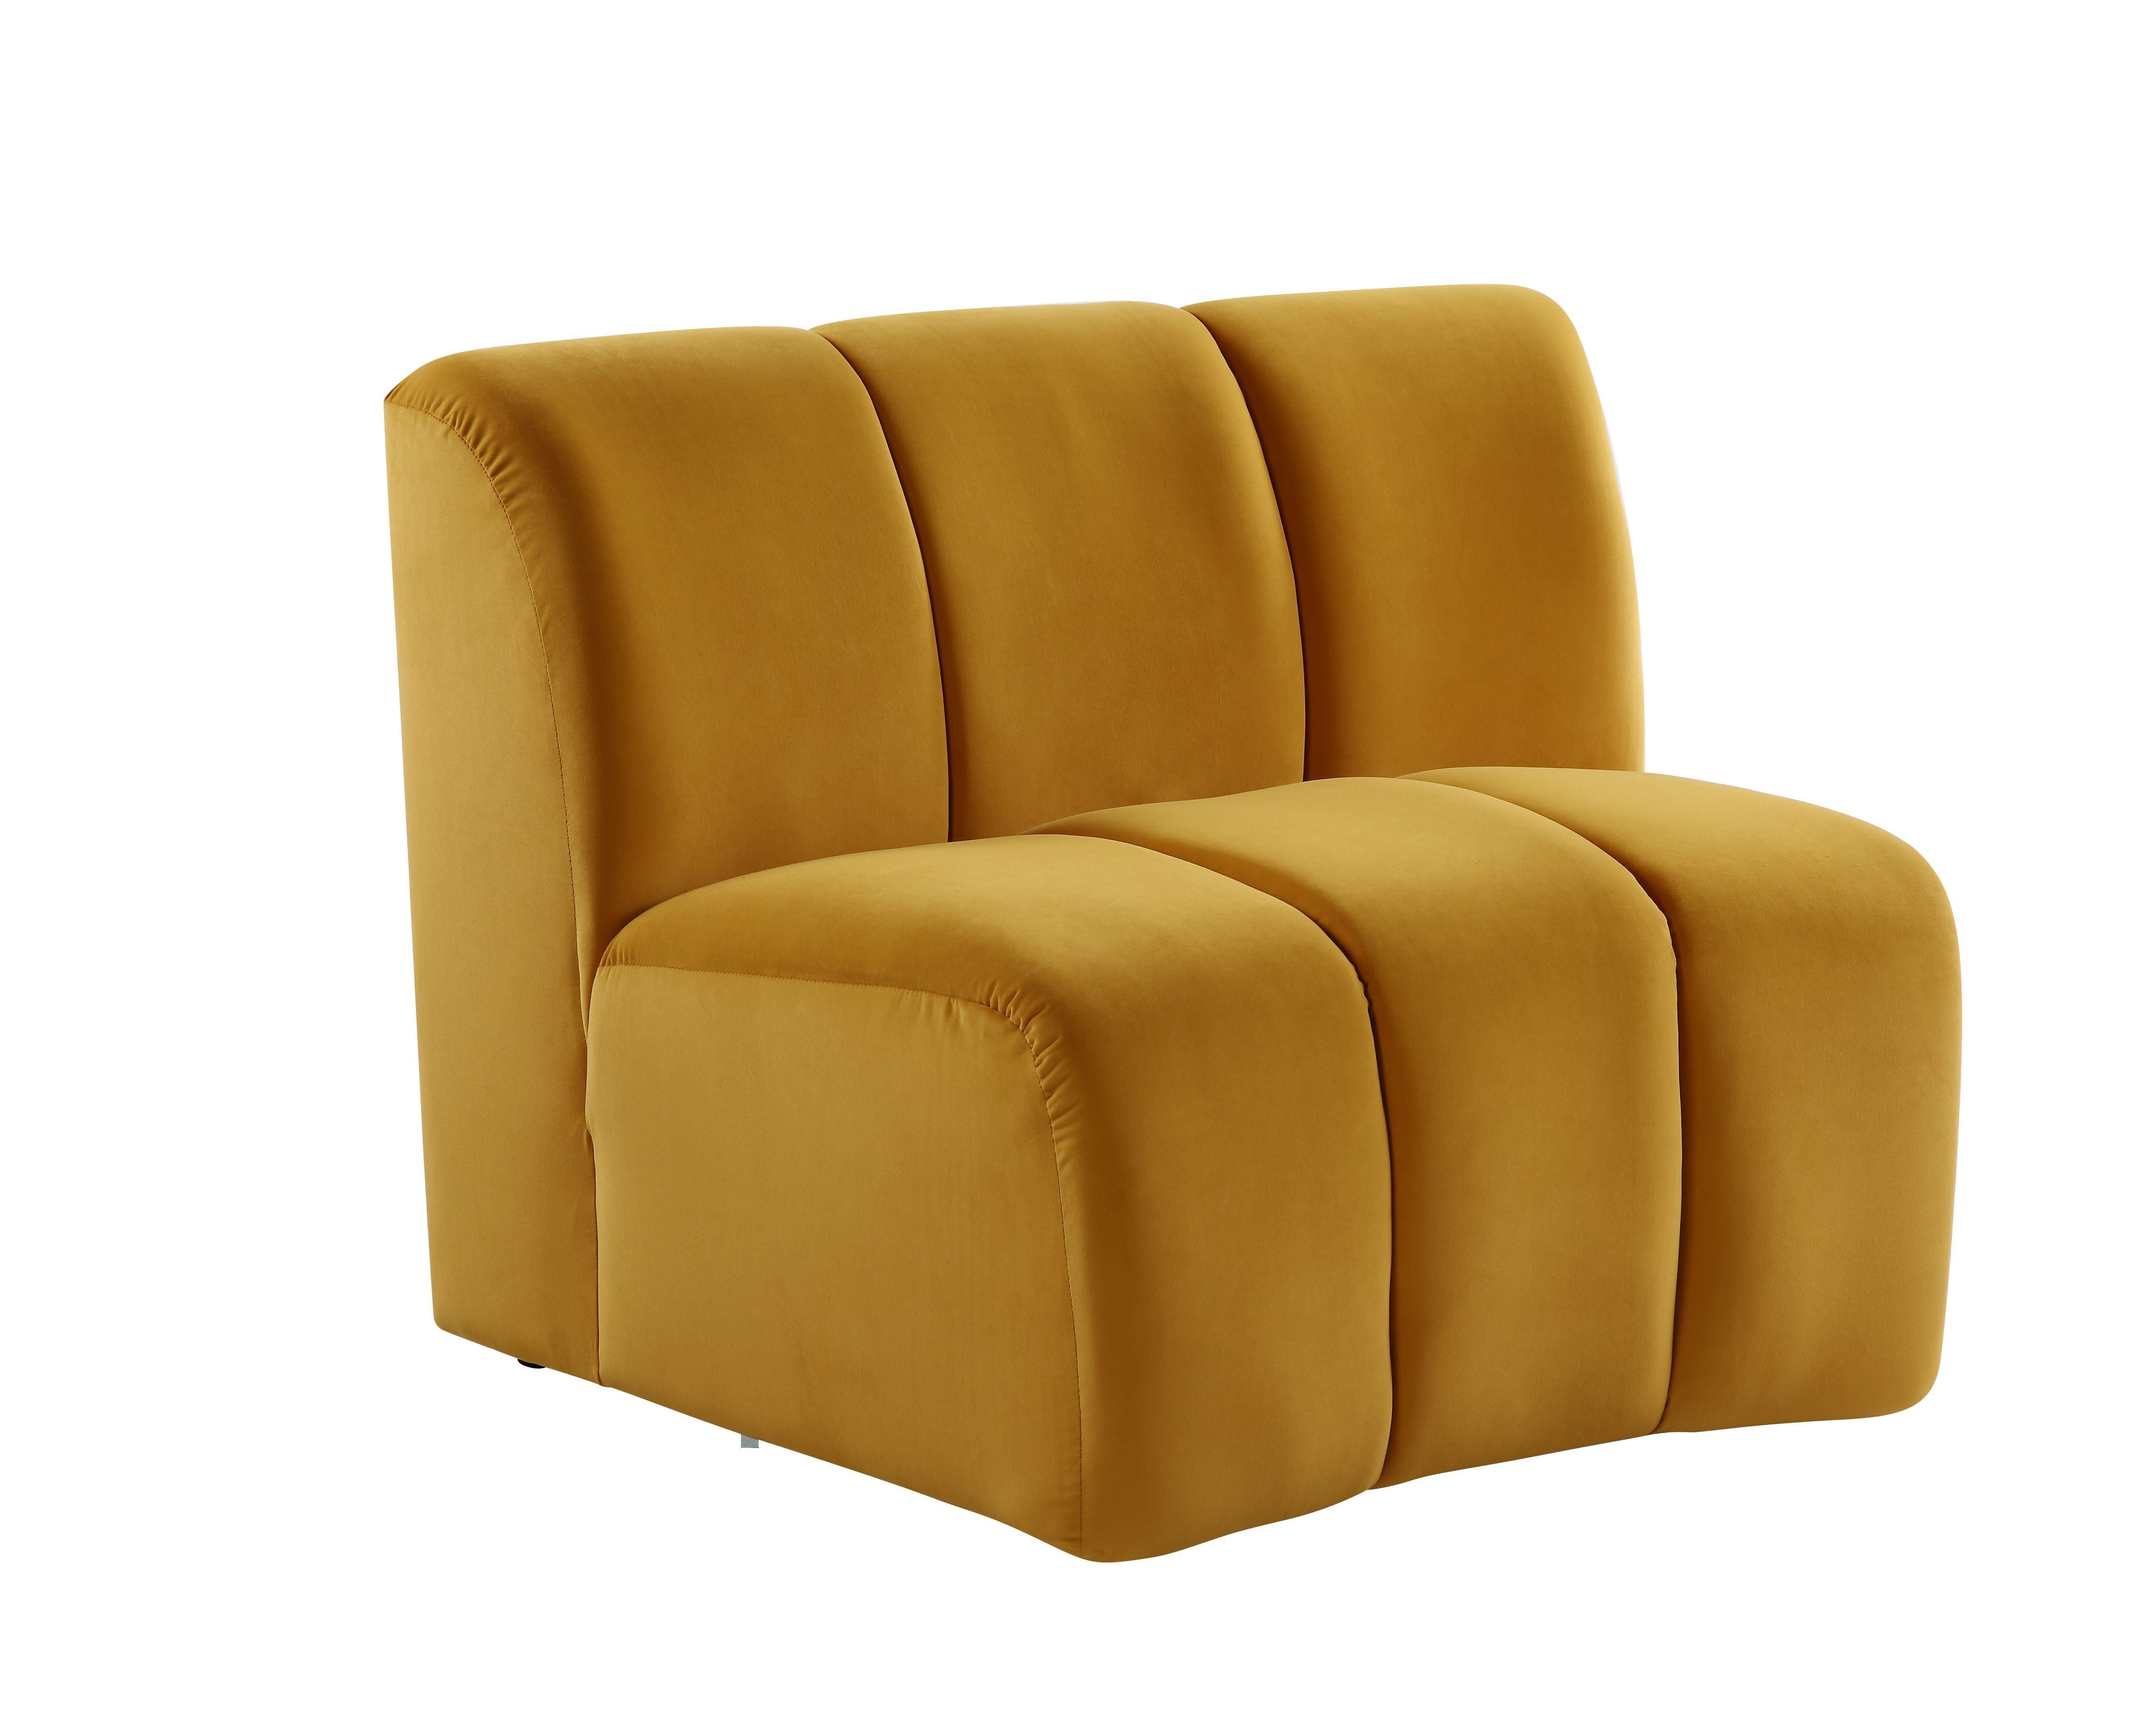 Picture of Acme Furniture LV01068 43 x 37 x 33 in. Felicia Modular Armless Chair, Yellow Velvet